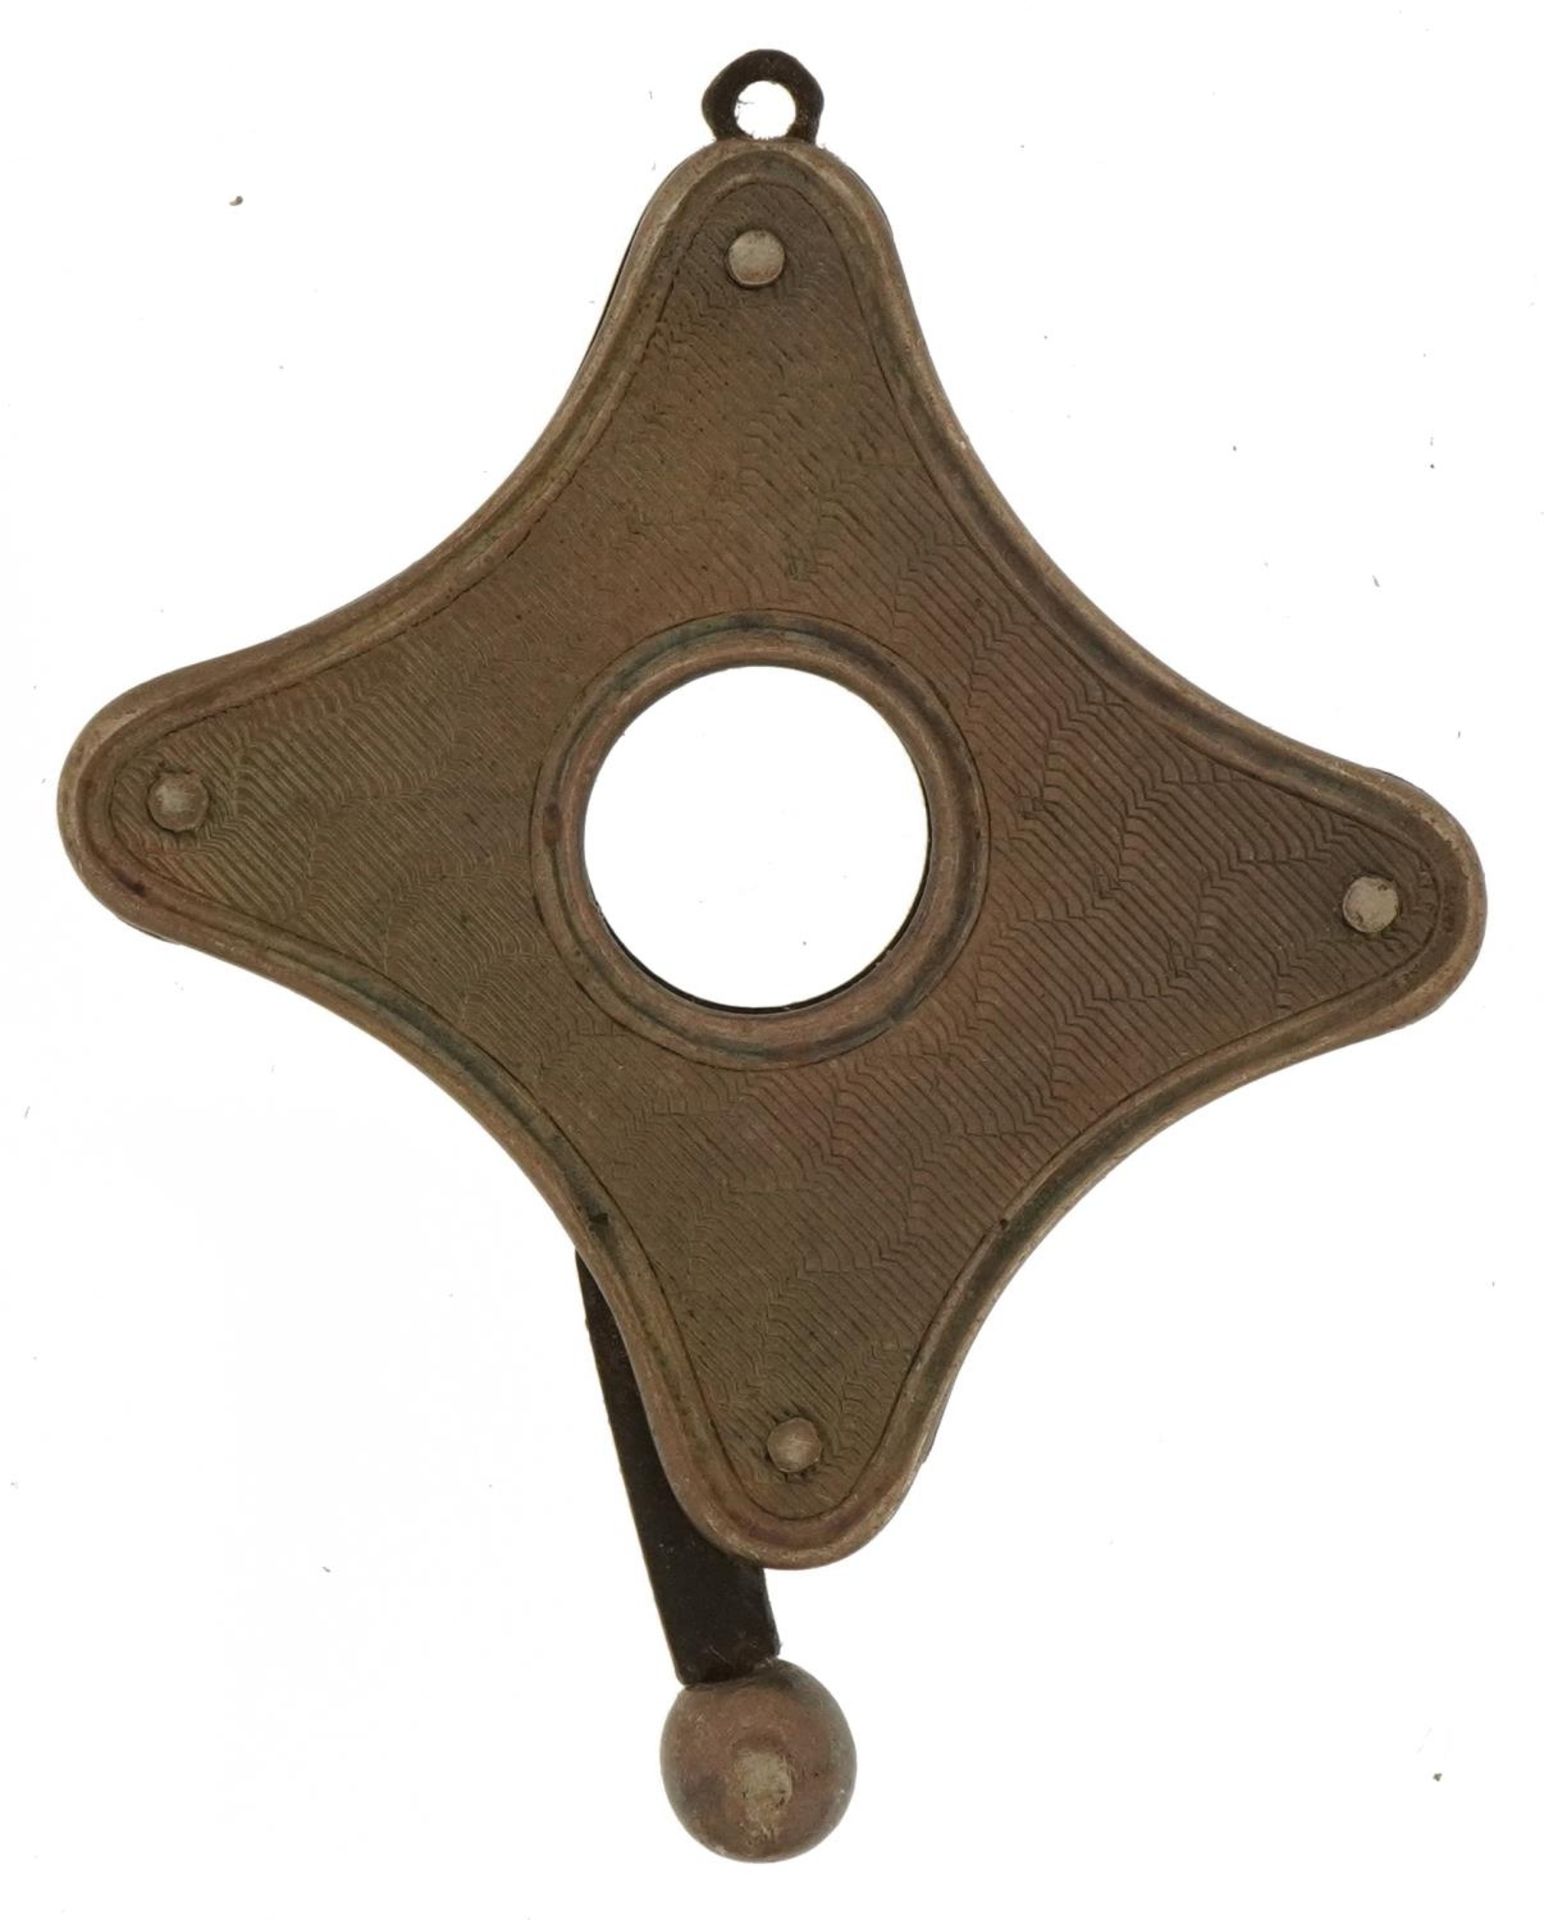 Unmarked silver engine turned cigar cutter, 2.7cm wide, 9.8g - Image 2 of 3